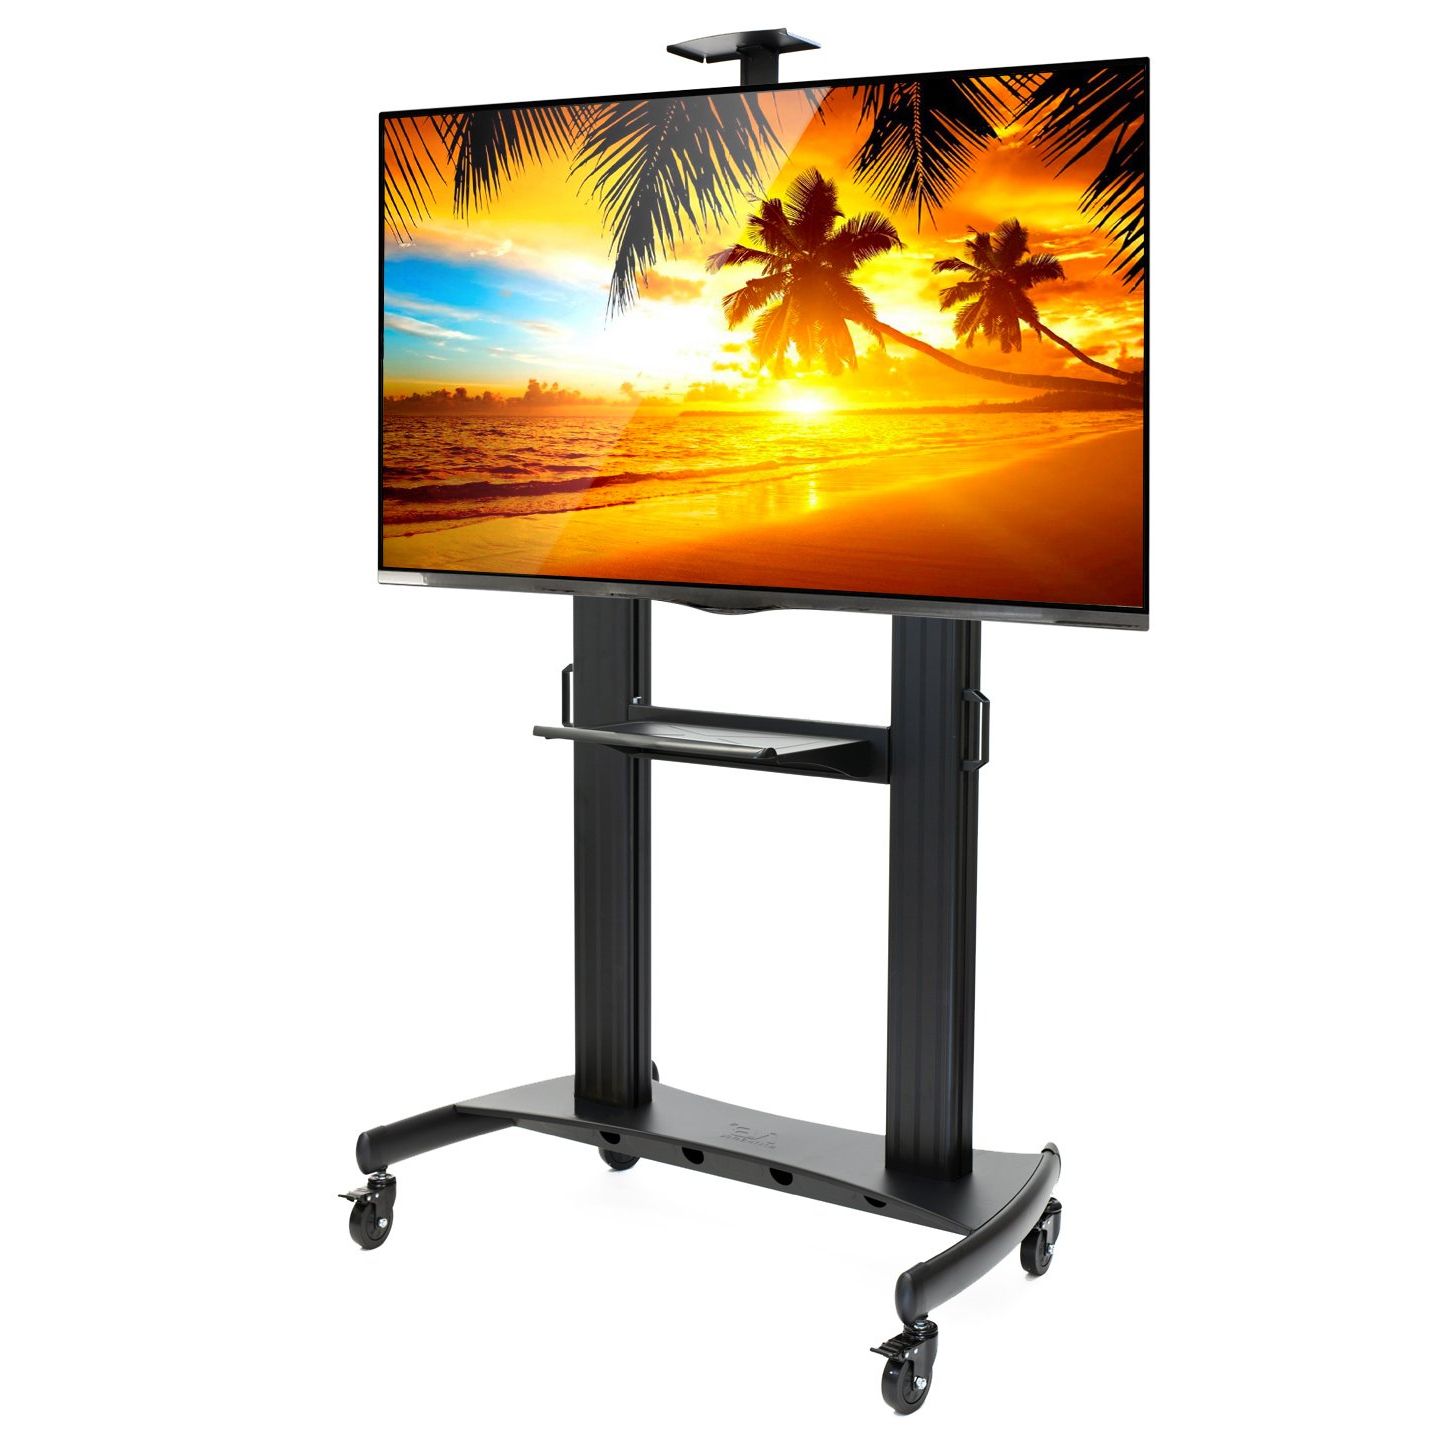 Preferred Upright Tv Stands Pertaining To Amazon: Rolling Tv Stand Mobile Tv Cart For 60 100 Inch Flat (View 7 of 20)